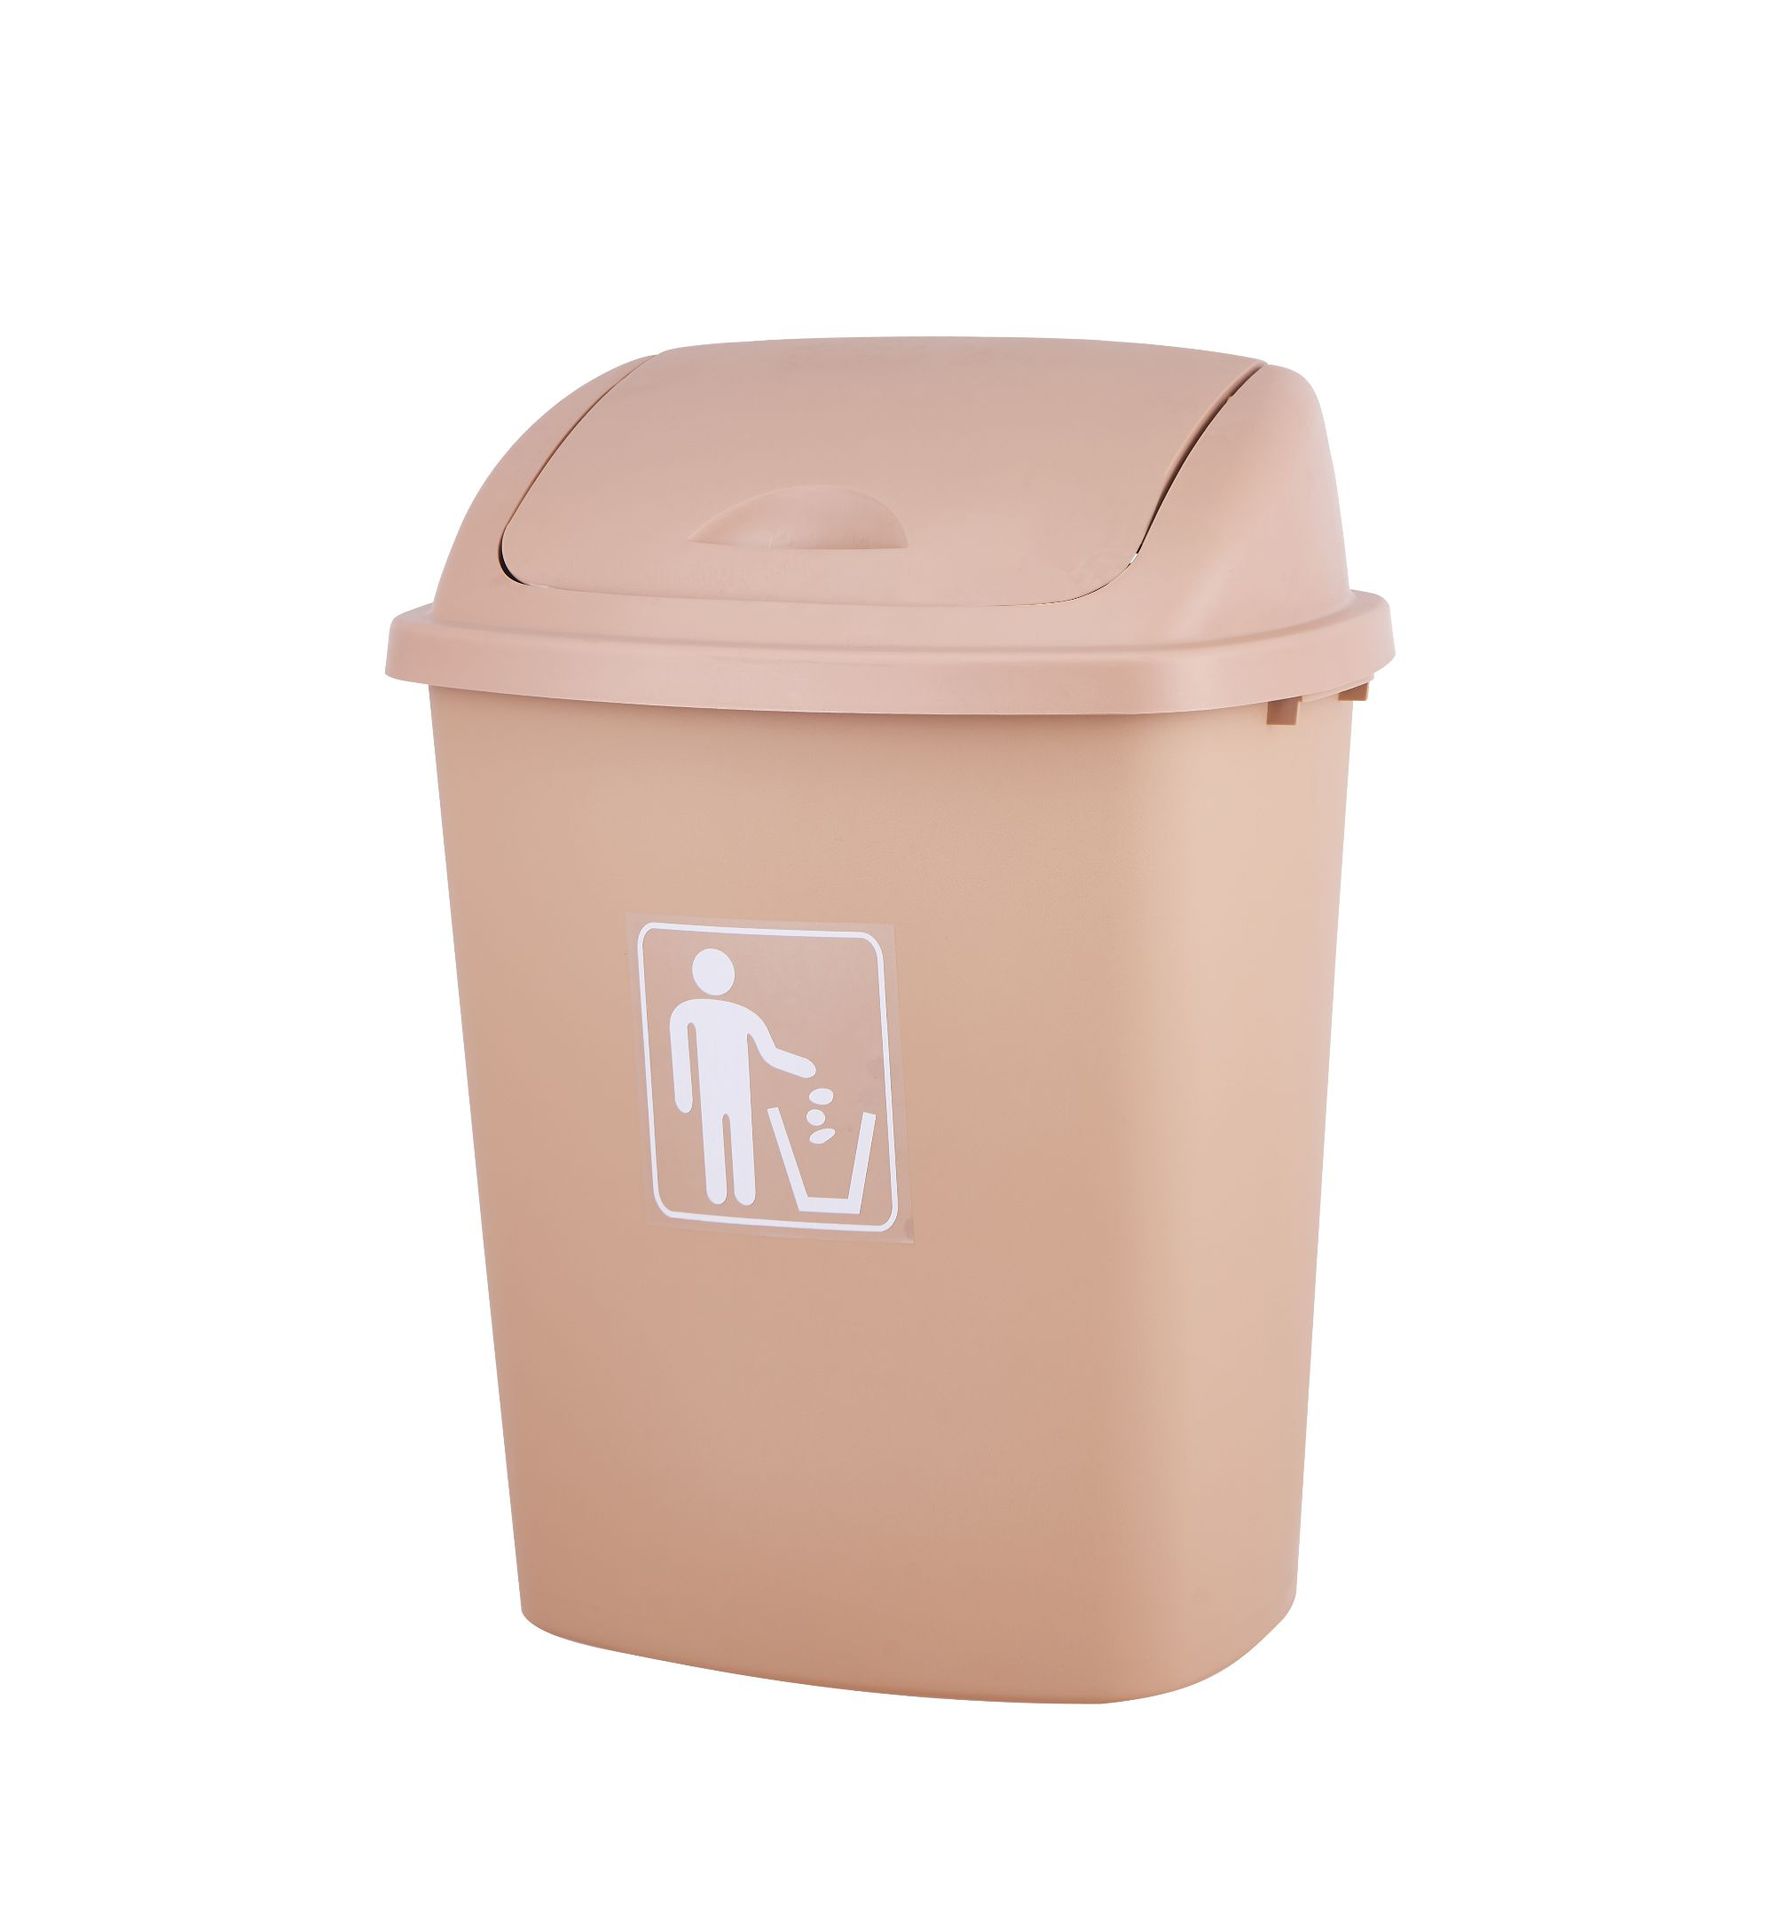 C19 Trash Can 70L Large Capacity Outdoor Use Property Commercial Covered Household Classroom Bucket with Lid Extra Large